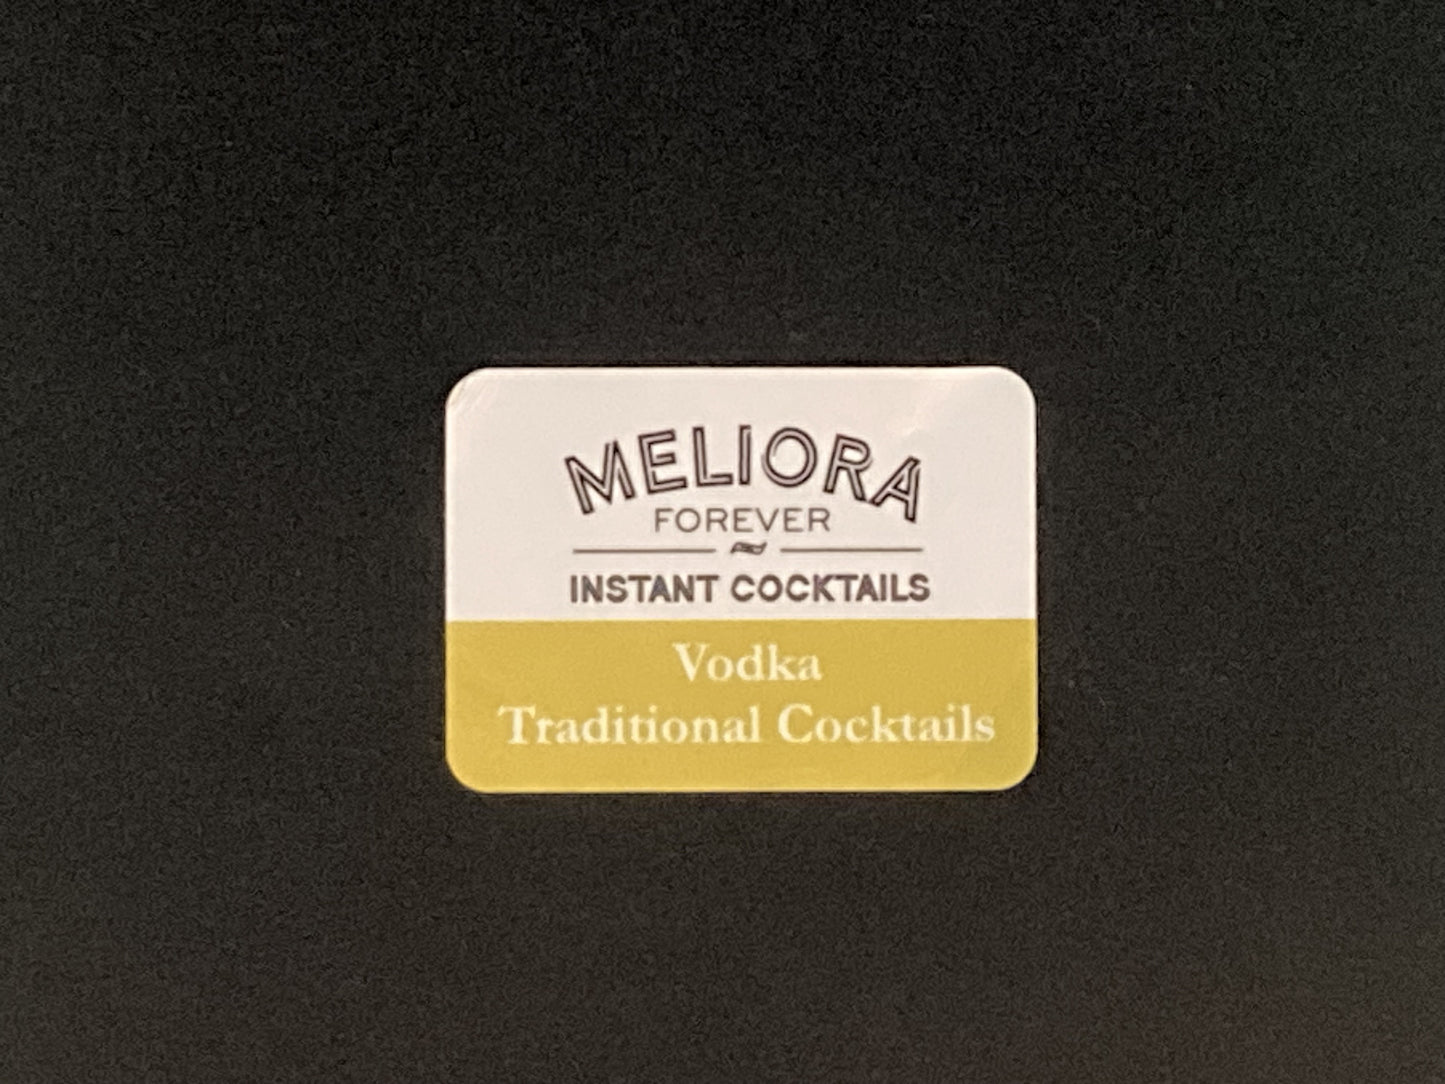 Vodka Traditional Cocktails Variety Packs